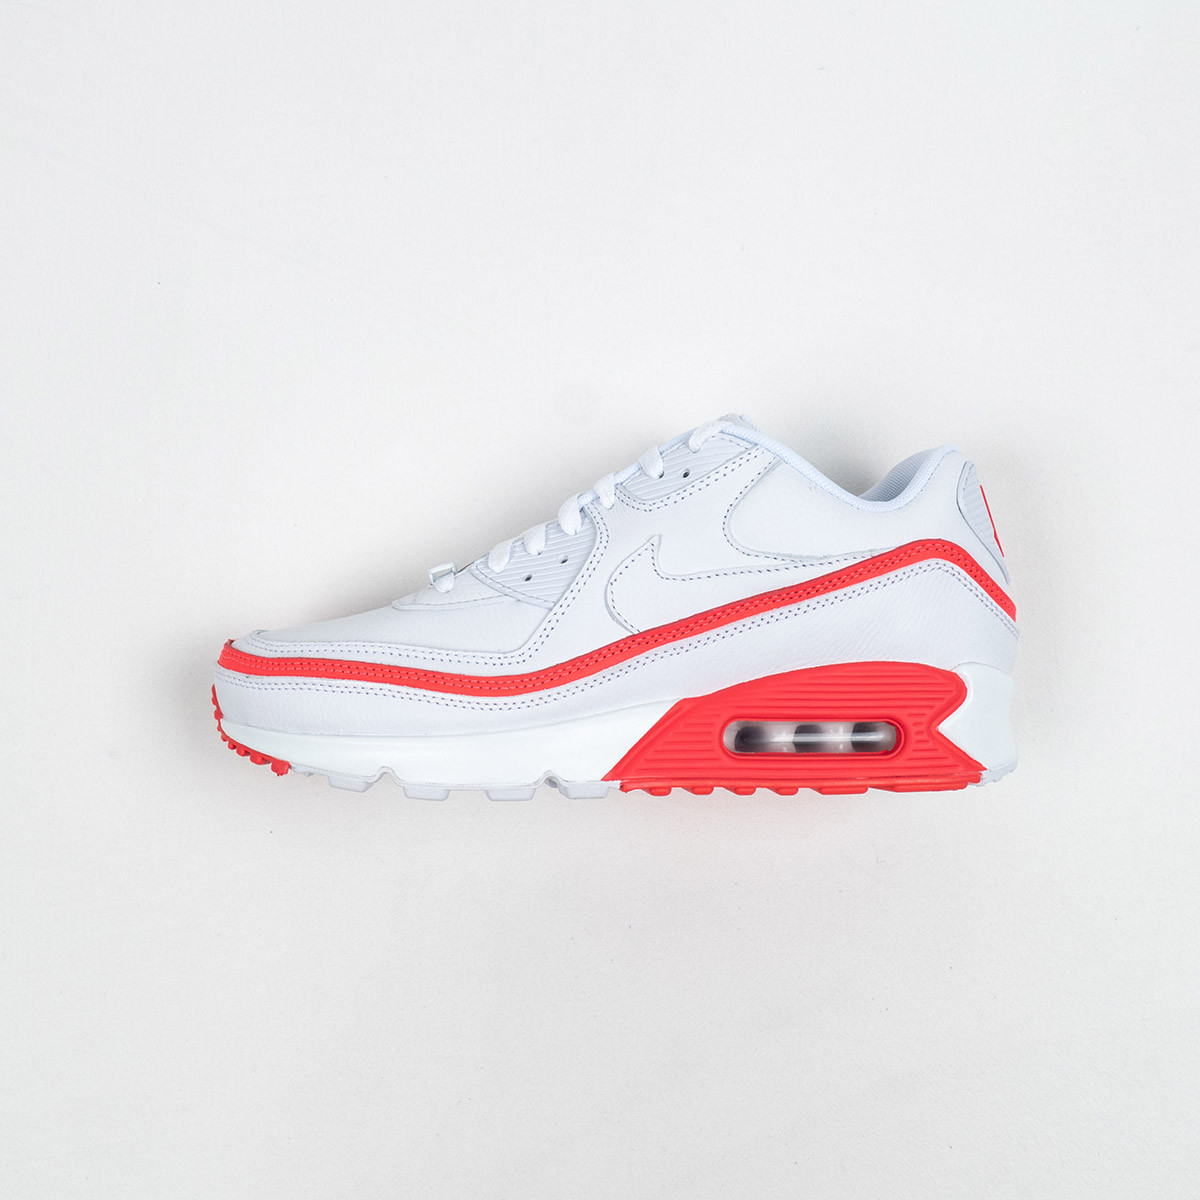 Undefeated x Nike Air Max 90 White Solar Red For Sale